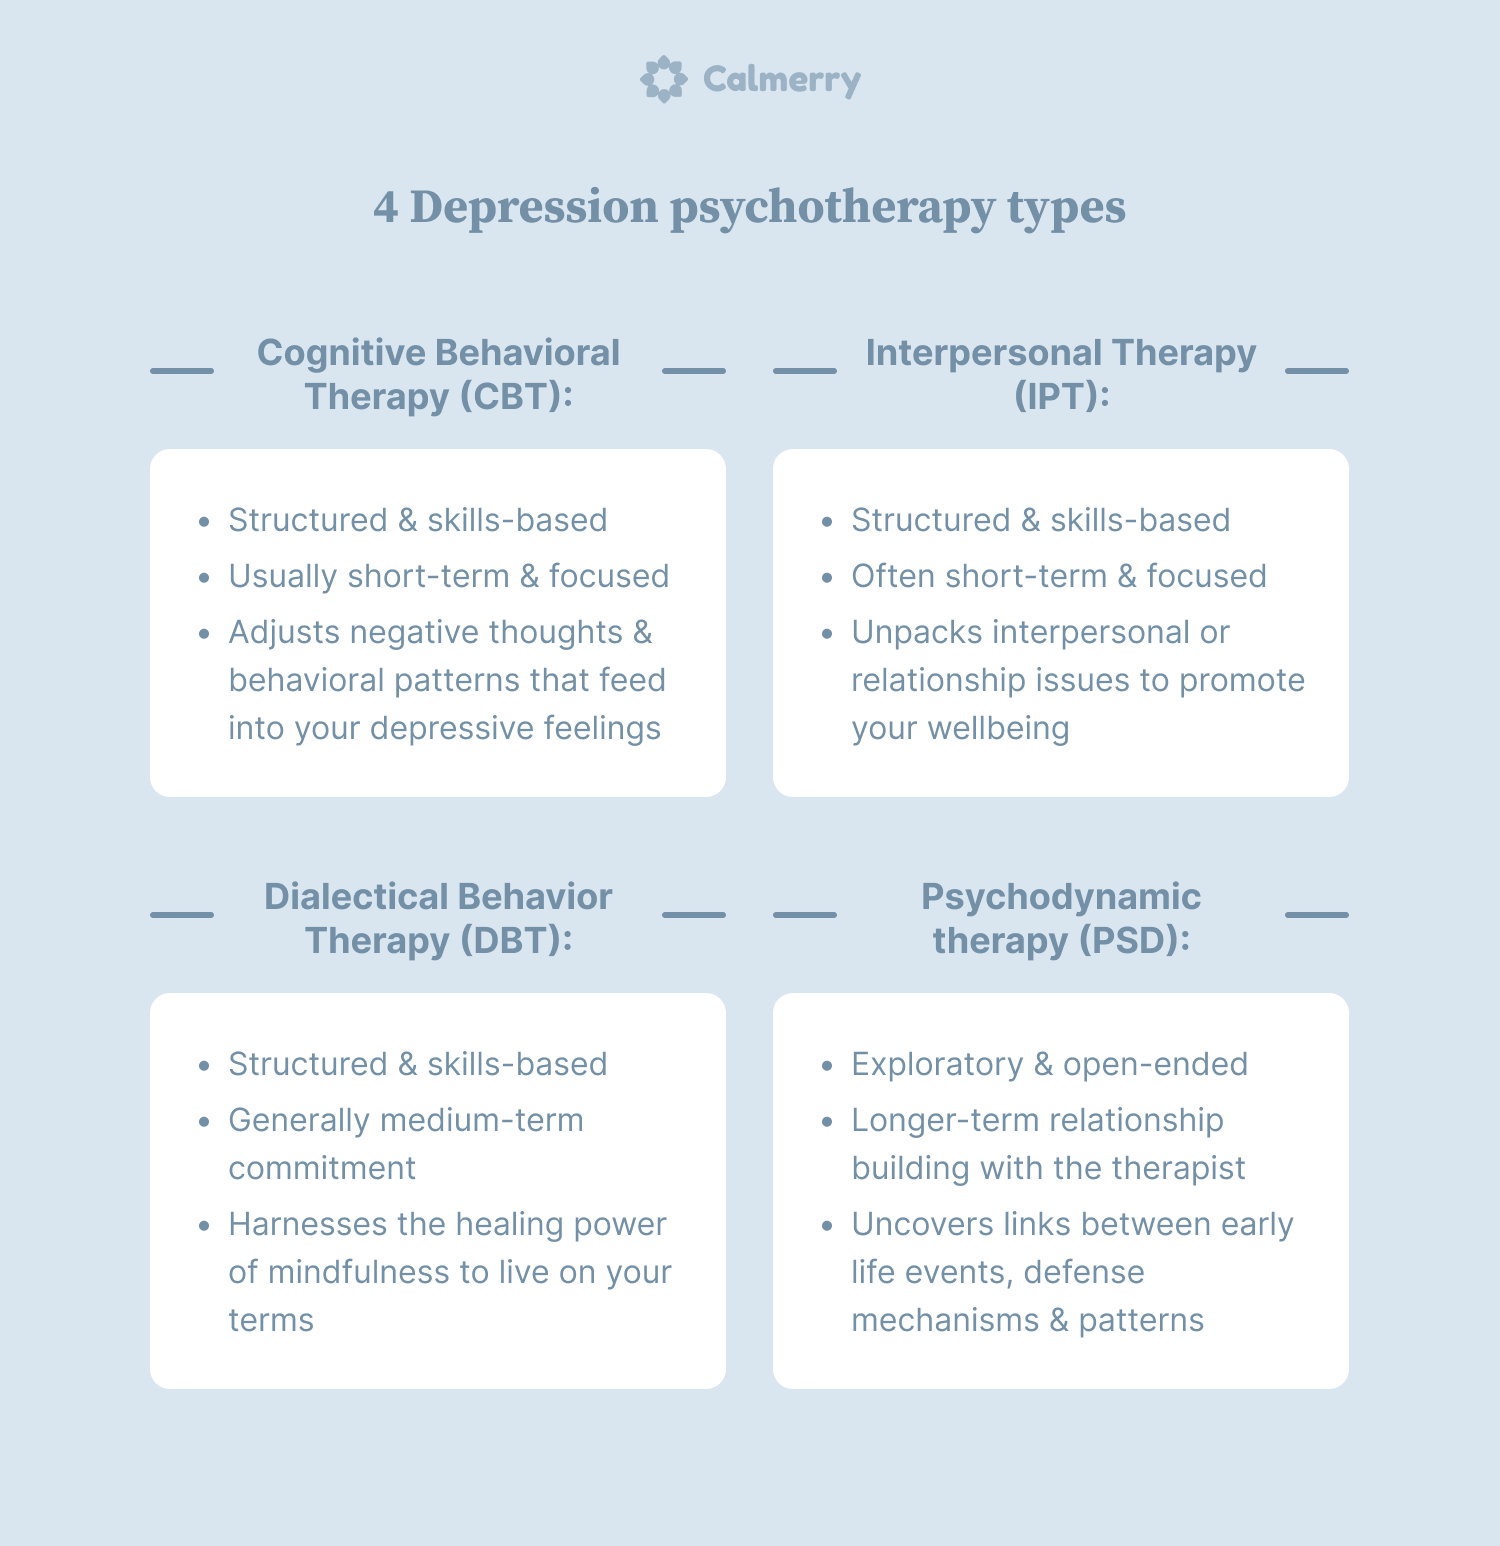 Types of Psychotherapy for Depression